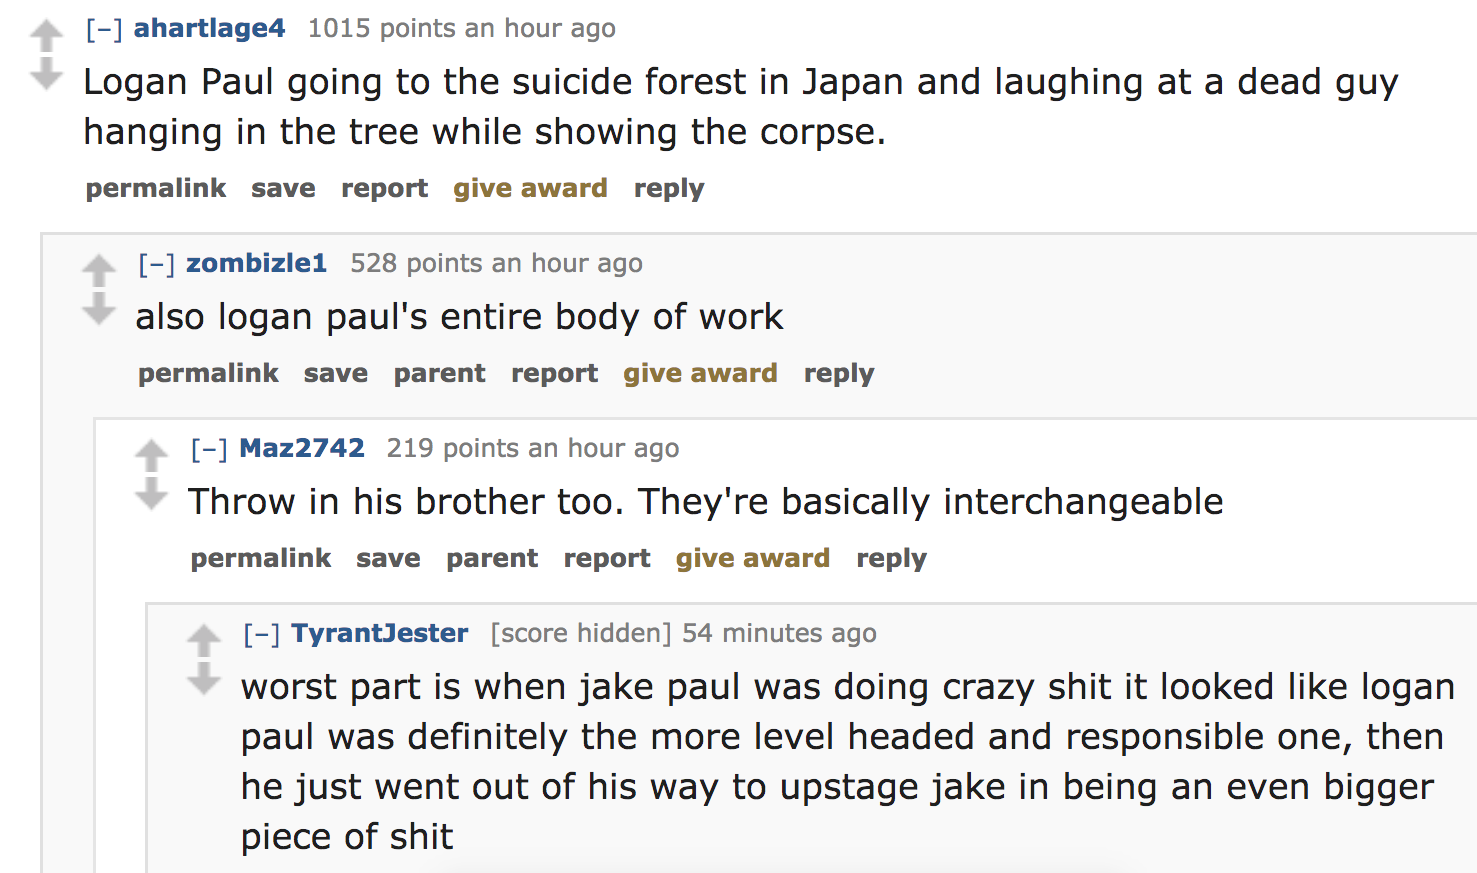 celebrity crimes - Logan Paul going to the suicide forest in Japan and laughing at a dead guy hanging in the tree while showing the corpse. permalink save report give award zombizle1 528 points an hour ago also logan paul's entire